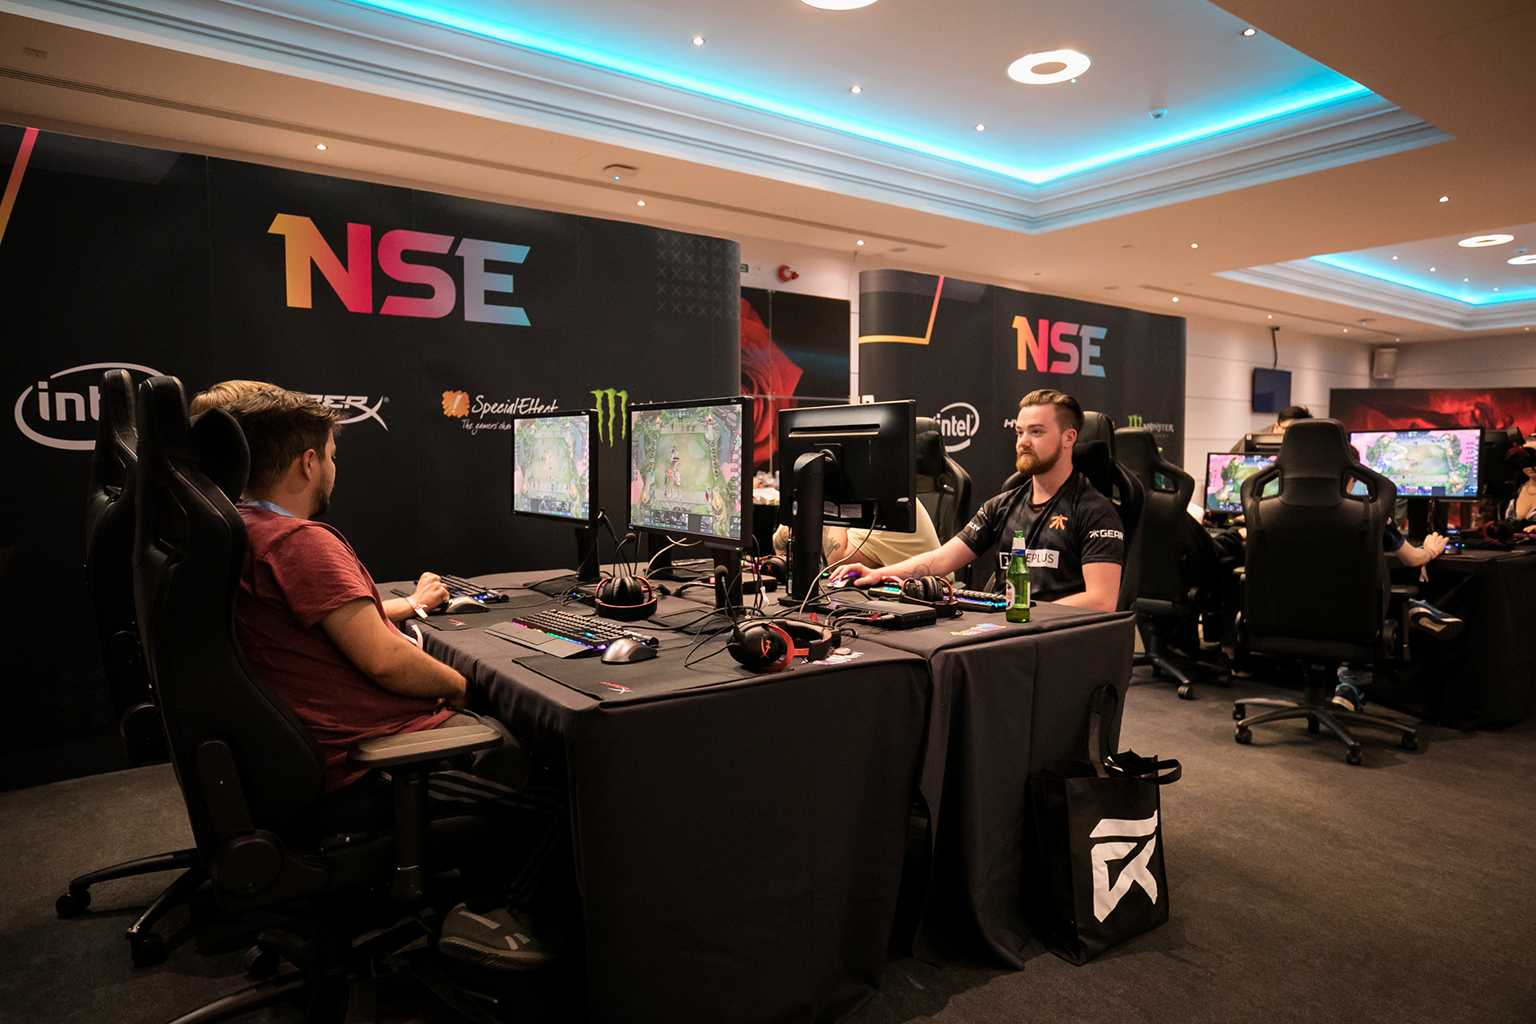 NSE launched an activation at last year's UKLC Summer Finals. Photo credit: Joe Brady/LVP